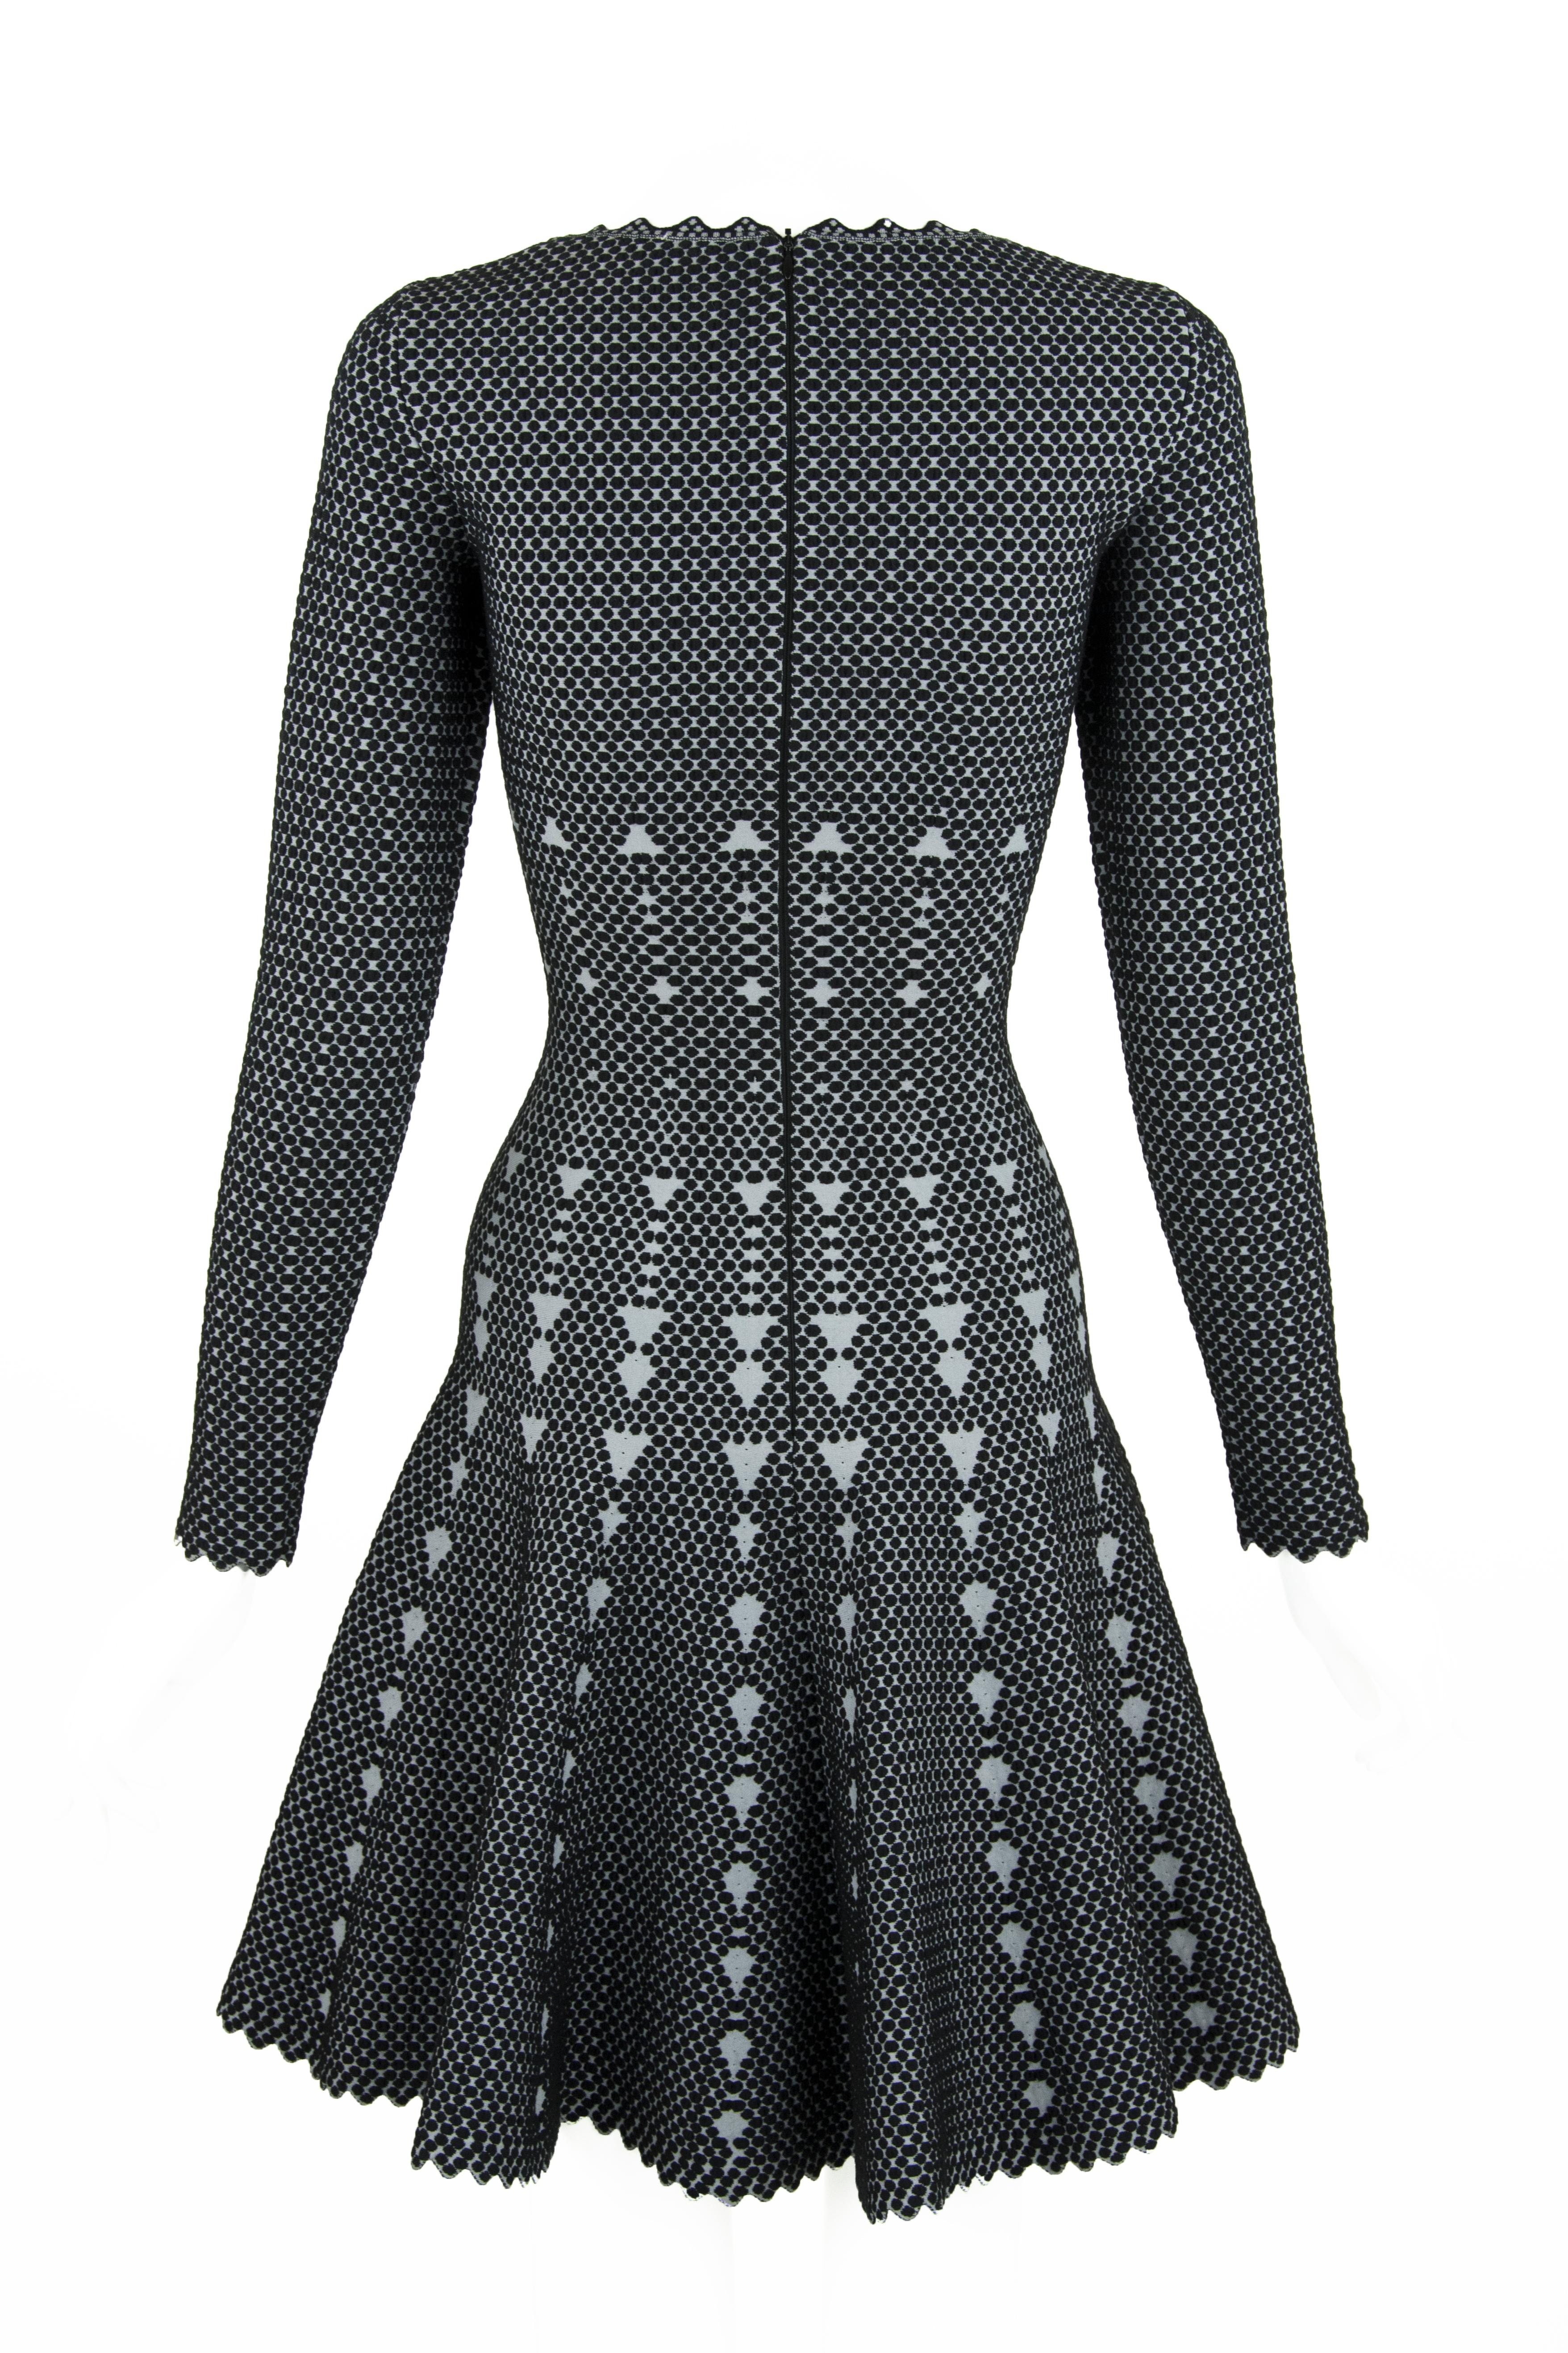 Alaia Black and Gray Knit Jacquard Fit & Flare Dress - Size FR 36 In Excellent Condition For Sale In Newport, RI